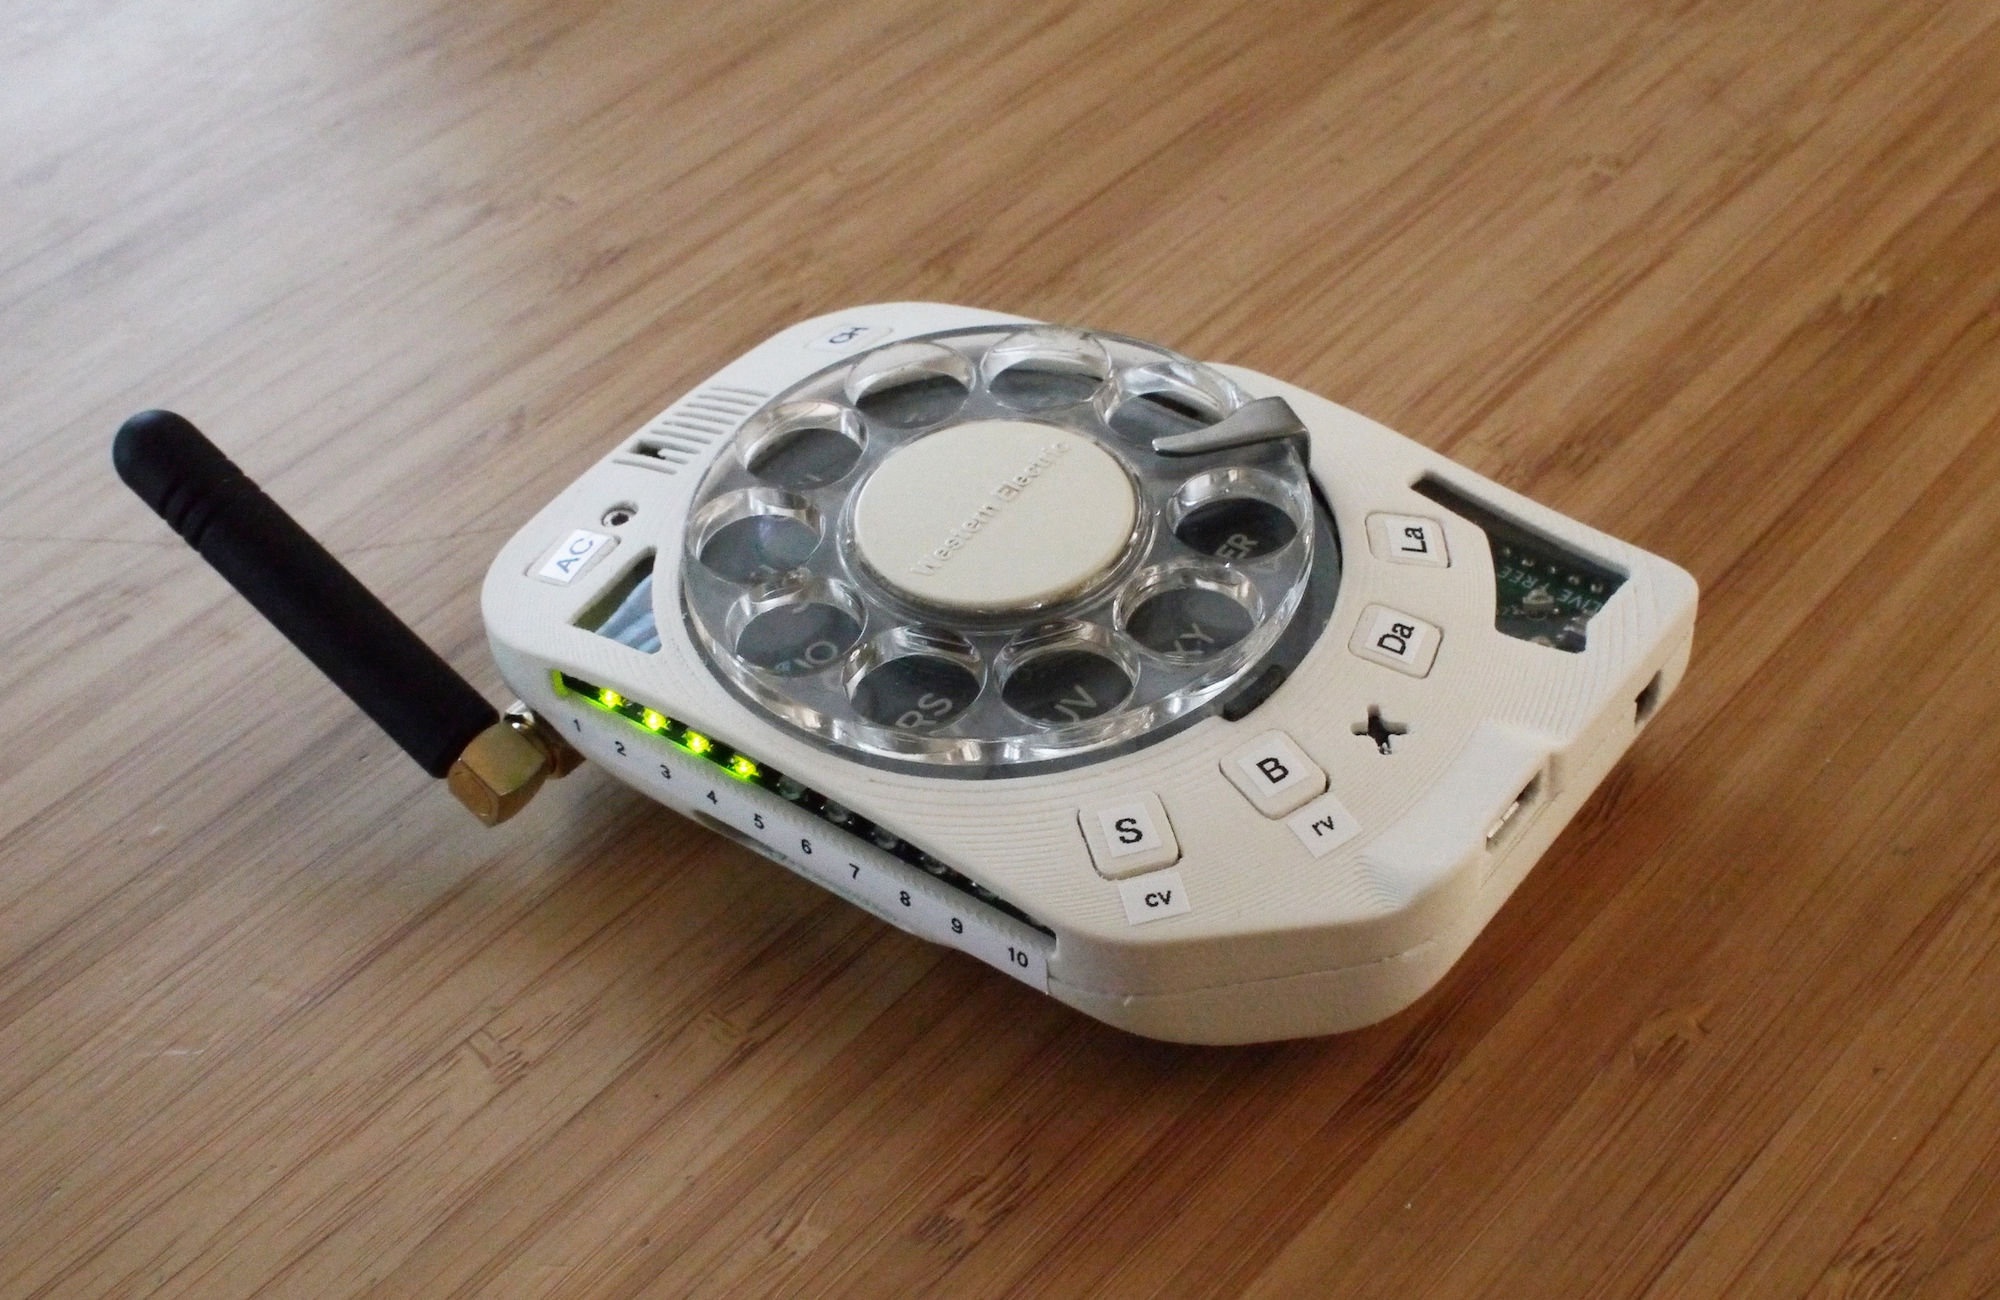 New York Engineer Builds a Distraction-Free Phone with Rotary Dials